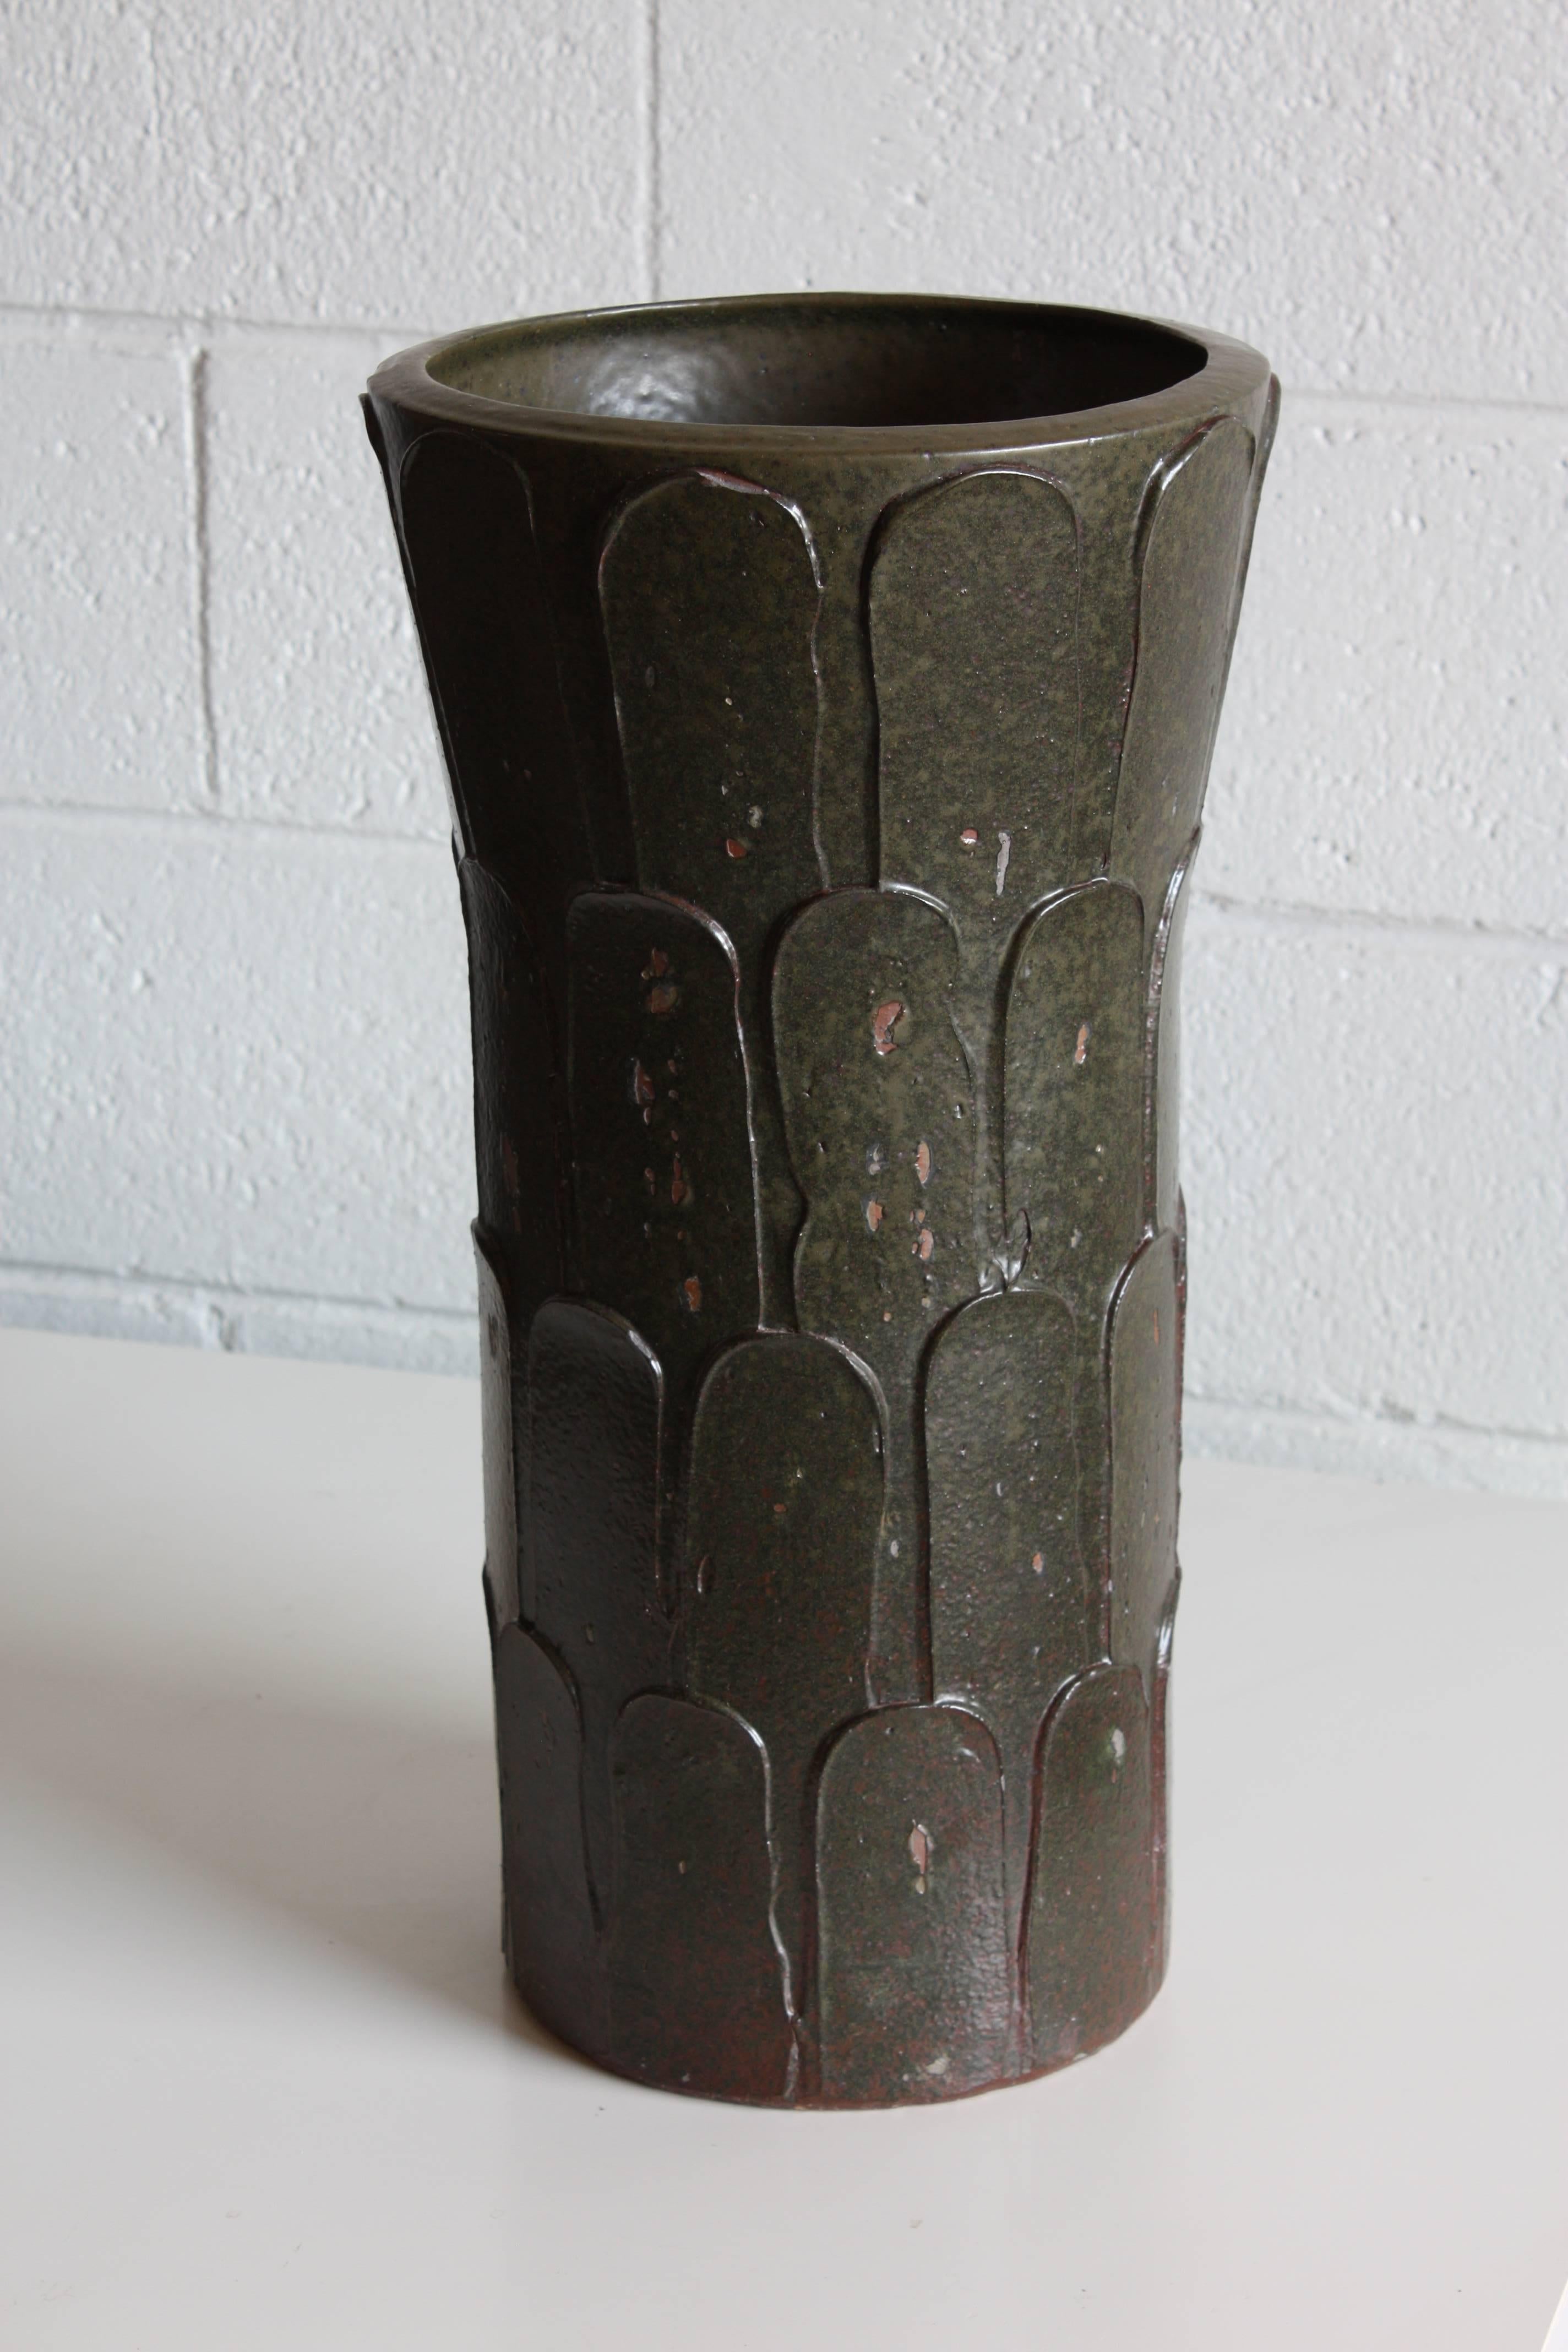 Rare glazed pot or umbrella stand by David Cressey for Architectural Pottery, pro or artisan series.